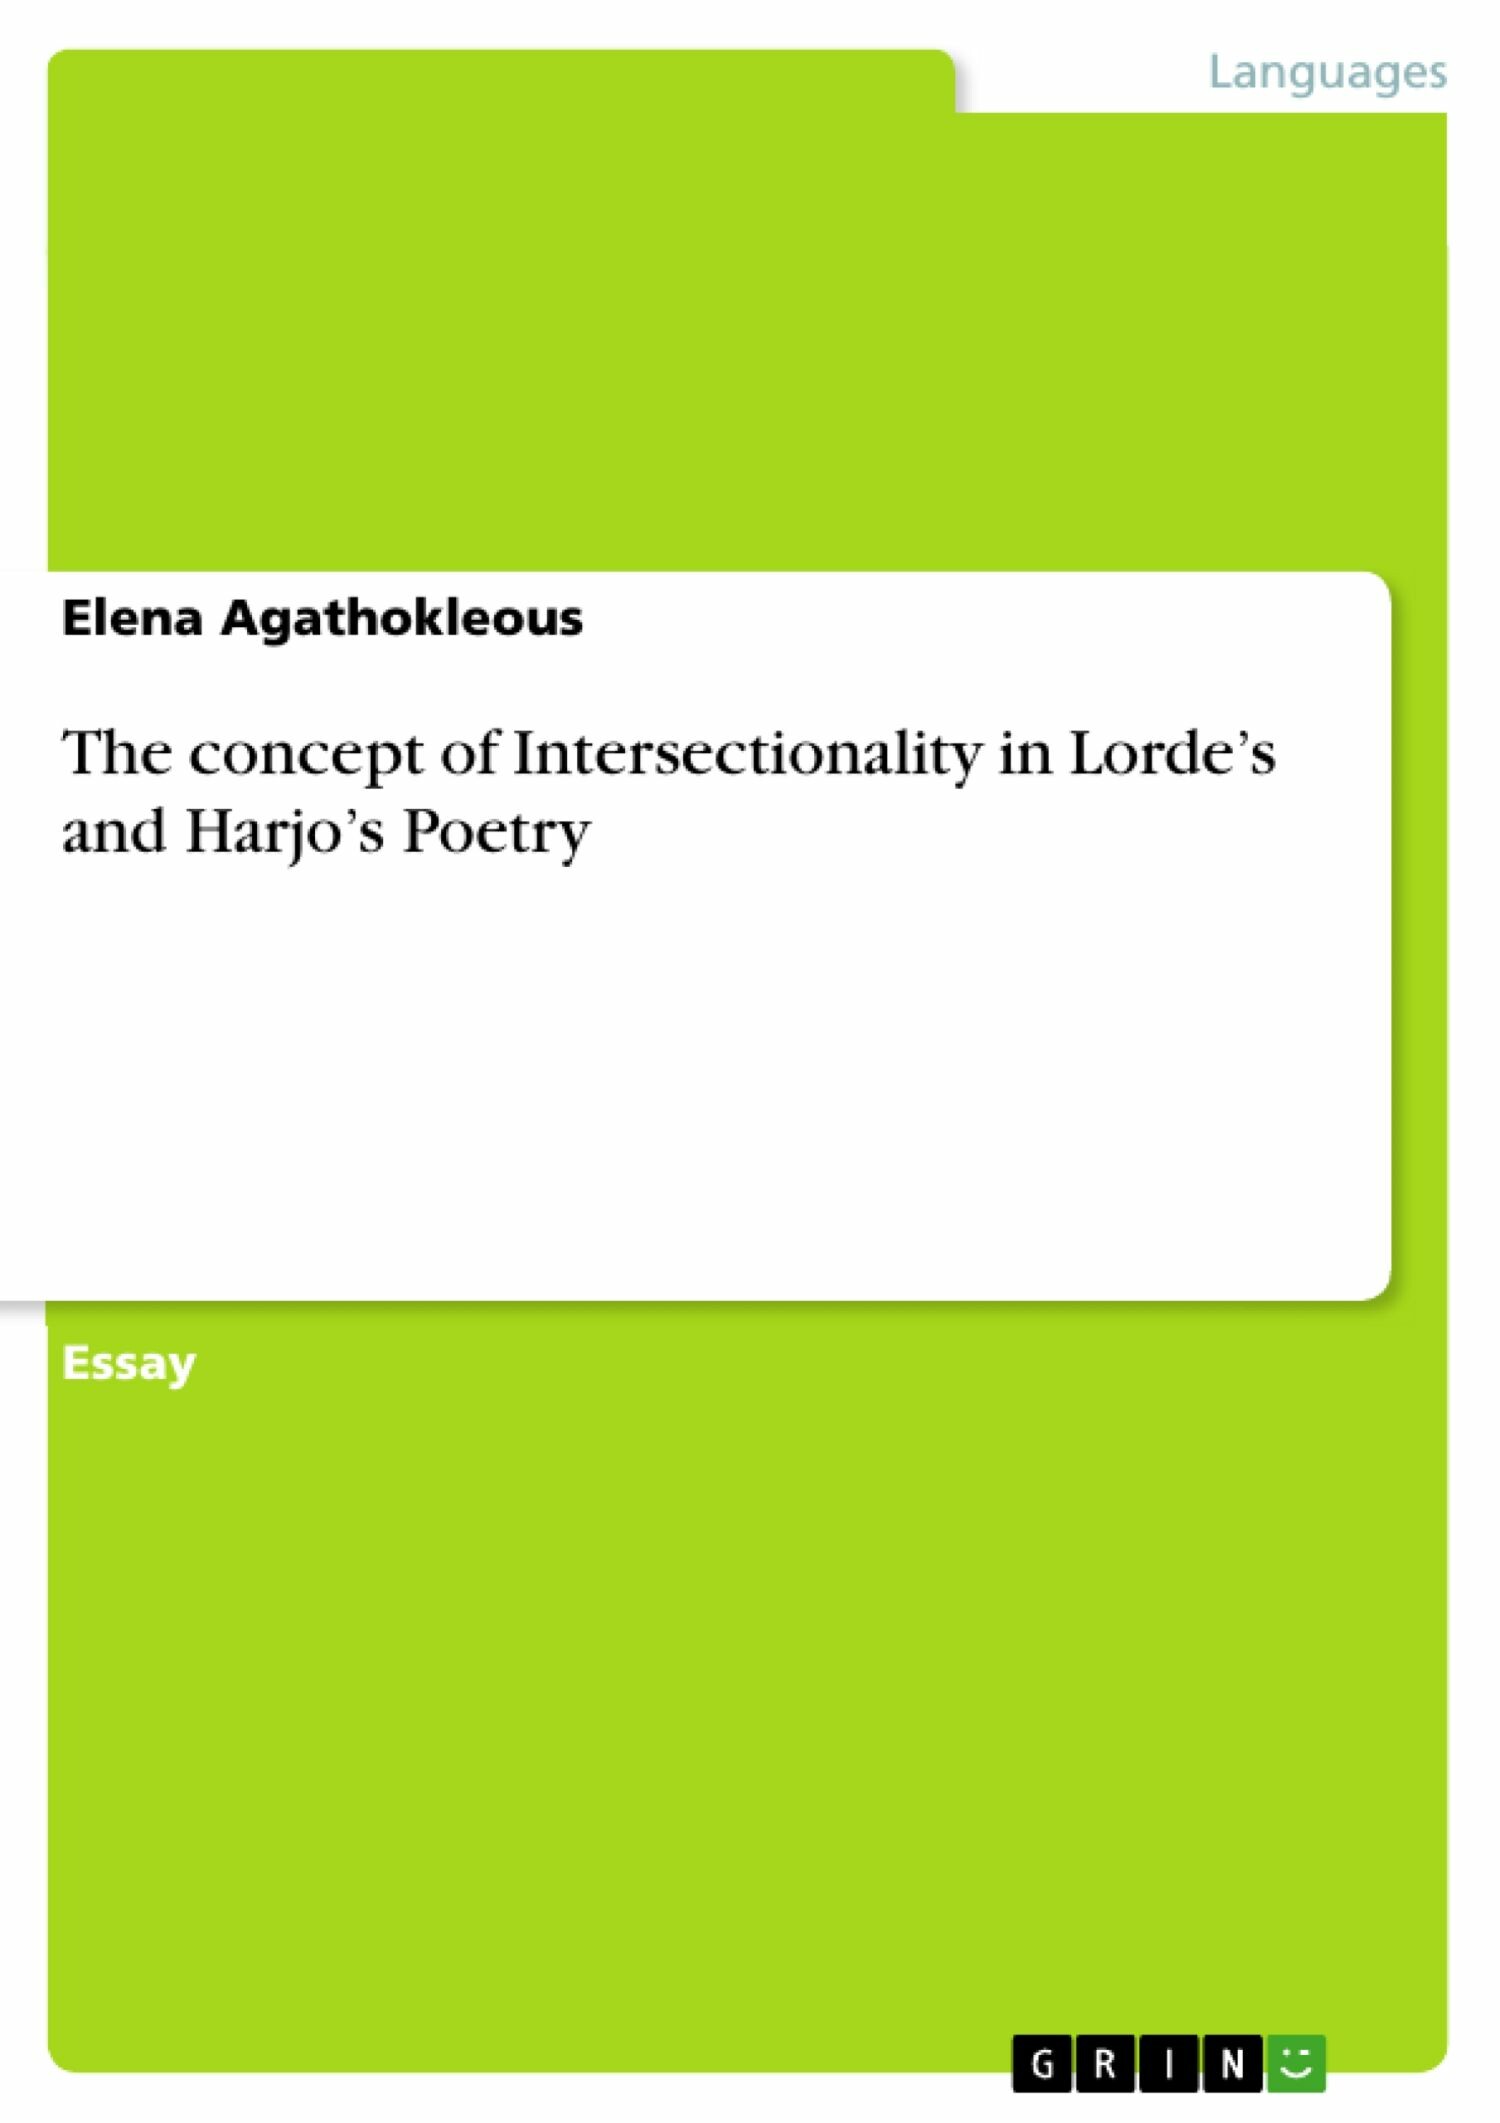 The concept of Intersectionality in Lorde's and Harjo's Poetry